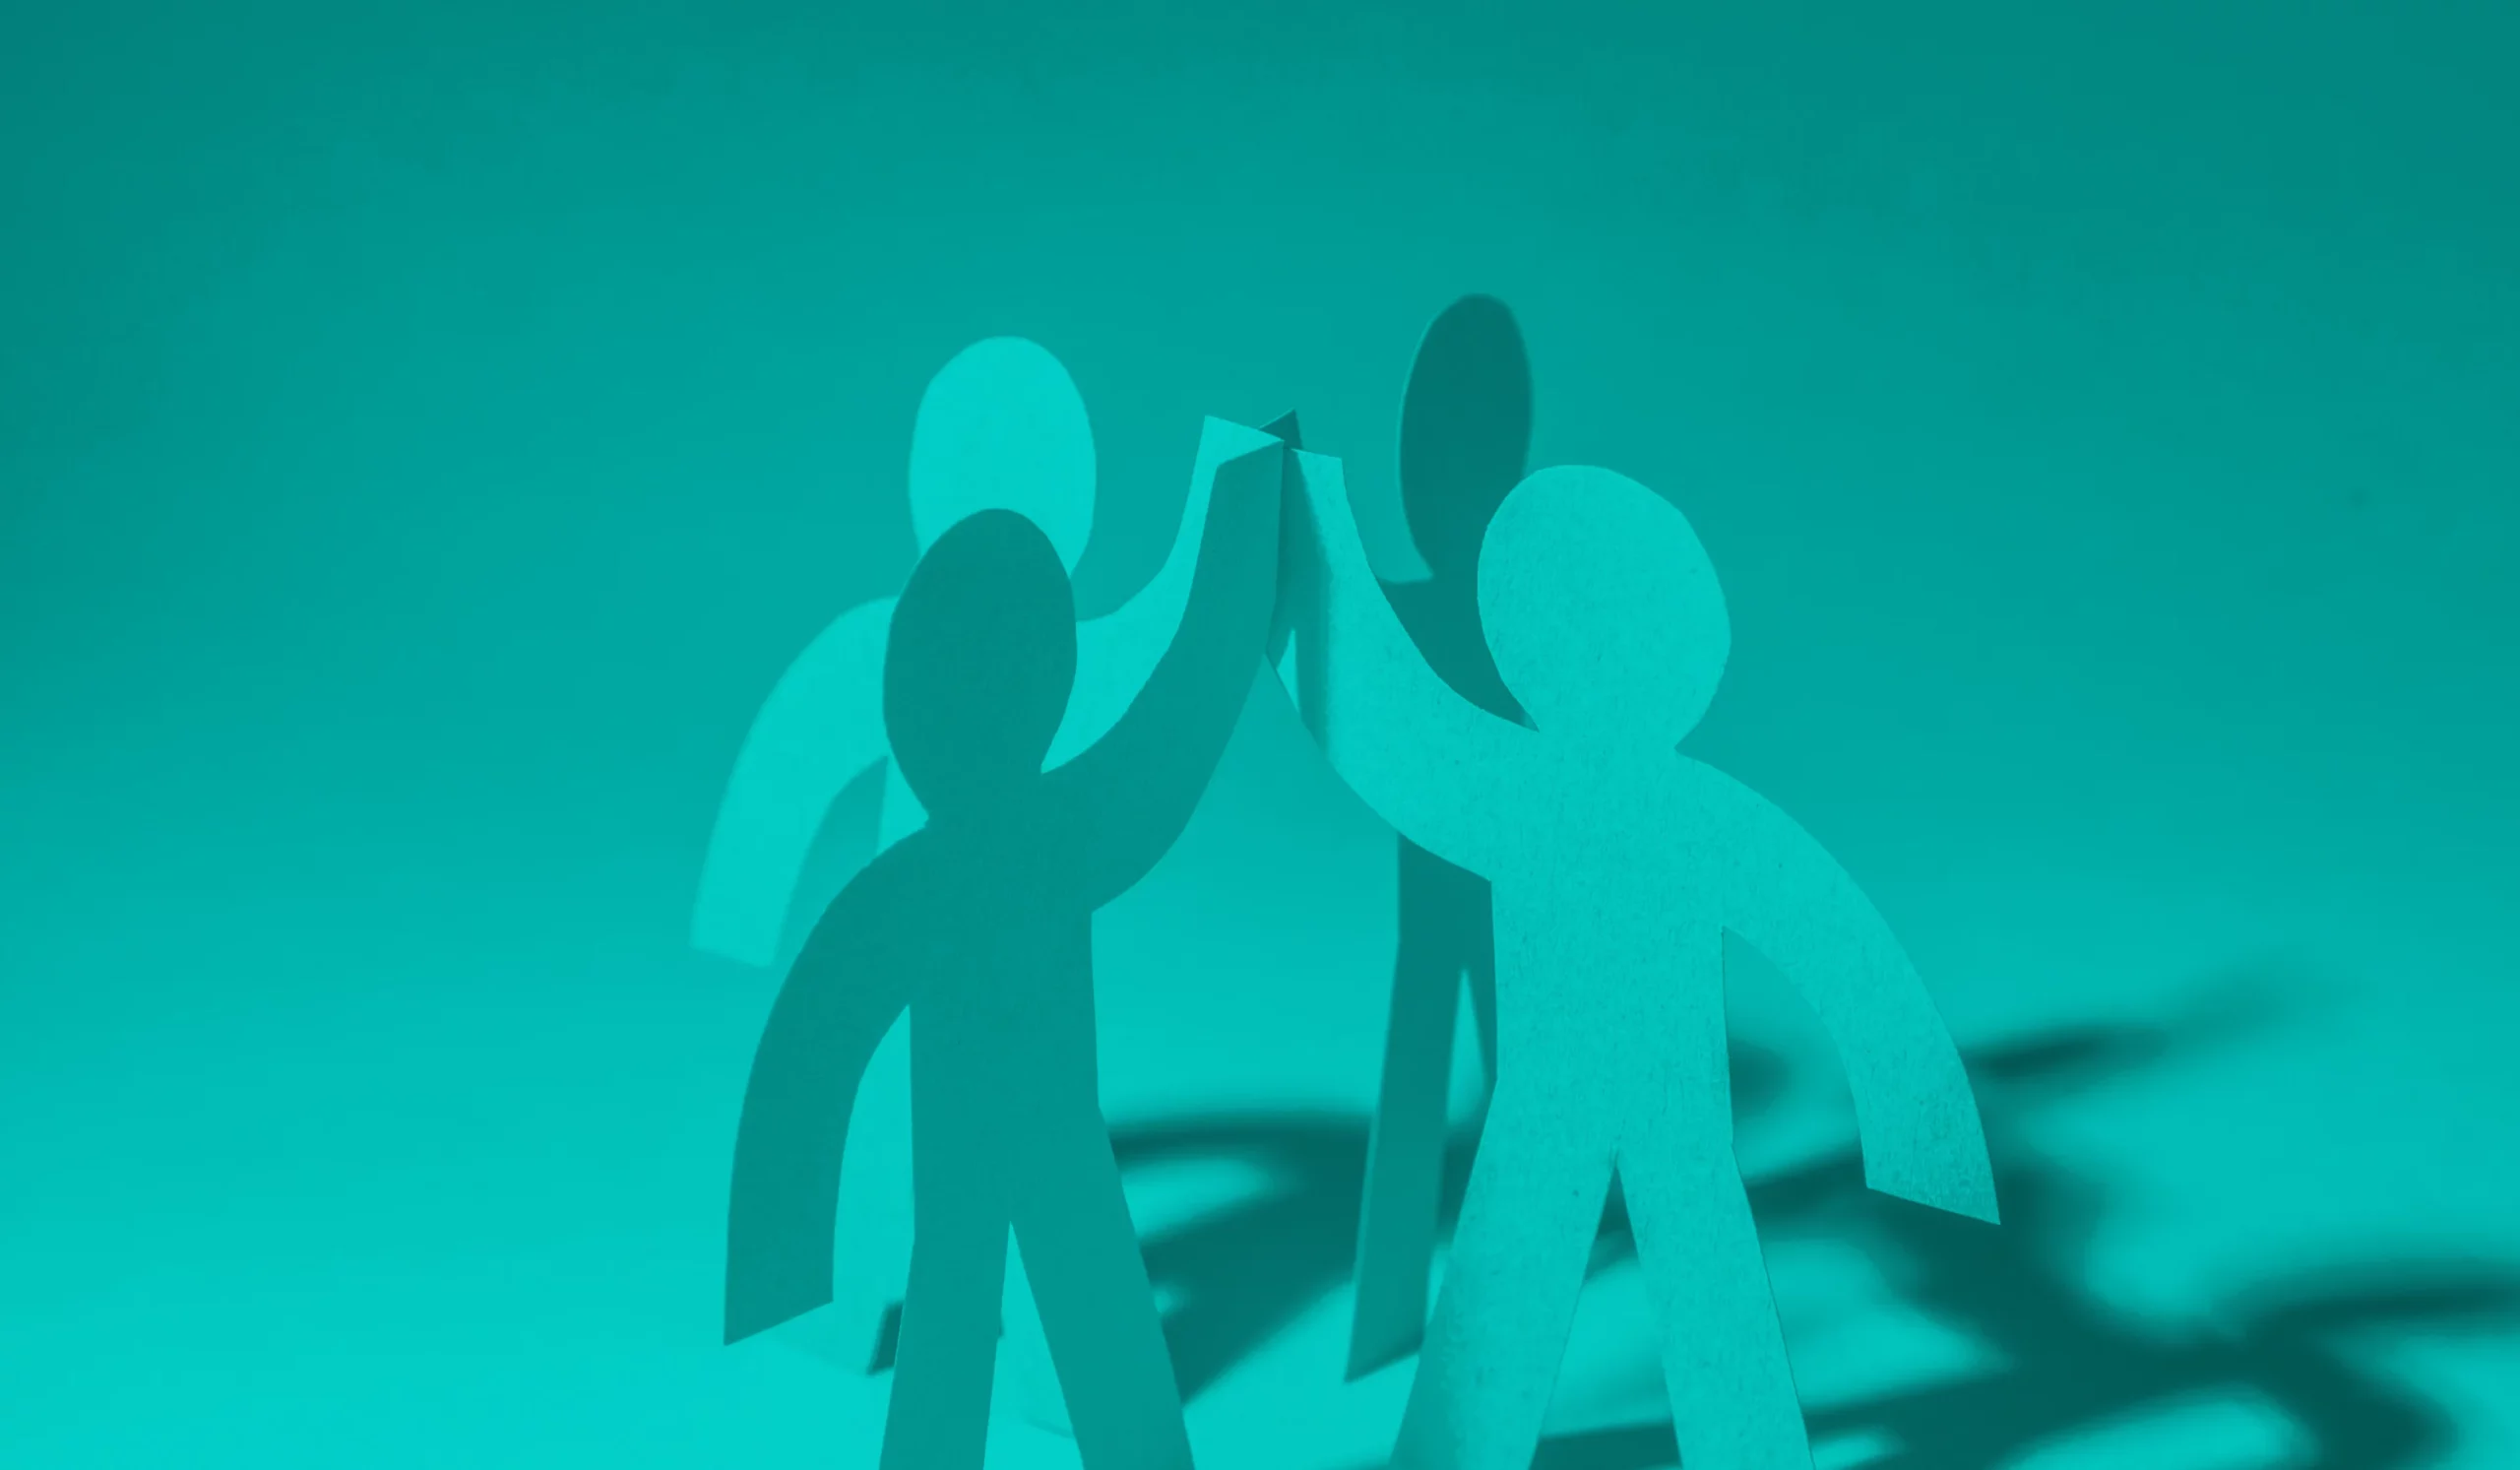 illustrative photo of four cut out human shapes with arms intersecting meant to abstractly illustrate partnership between an agency and a company